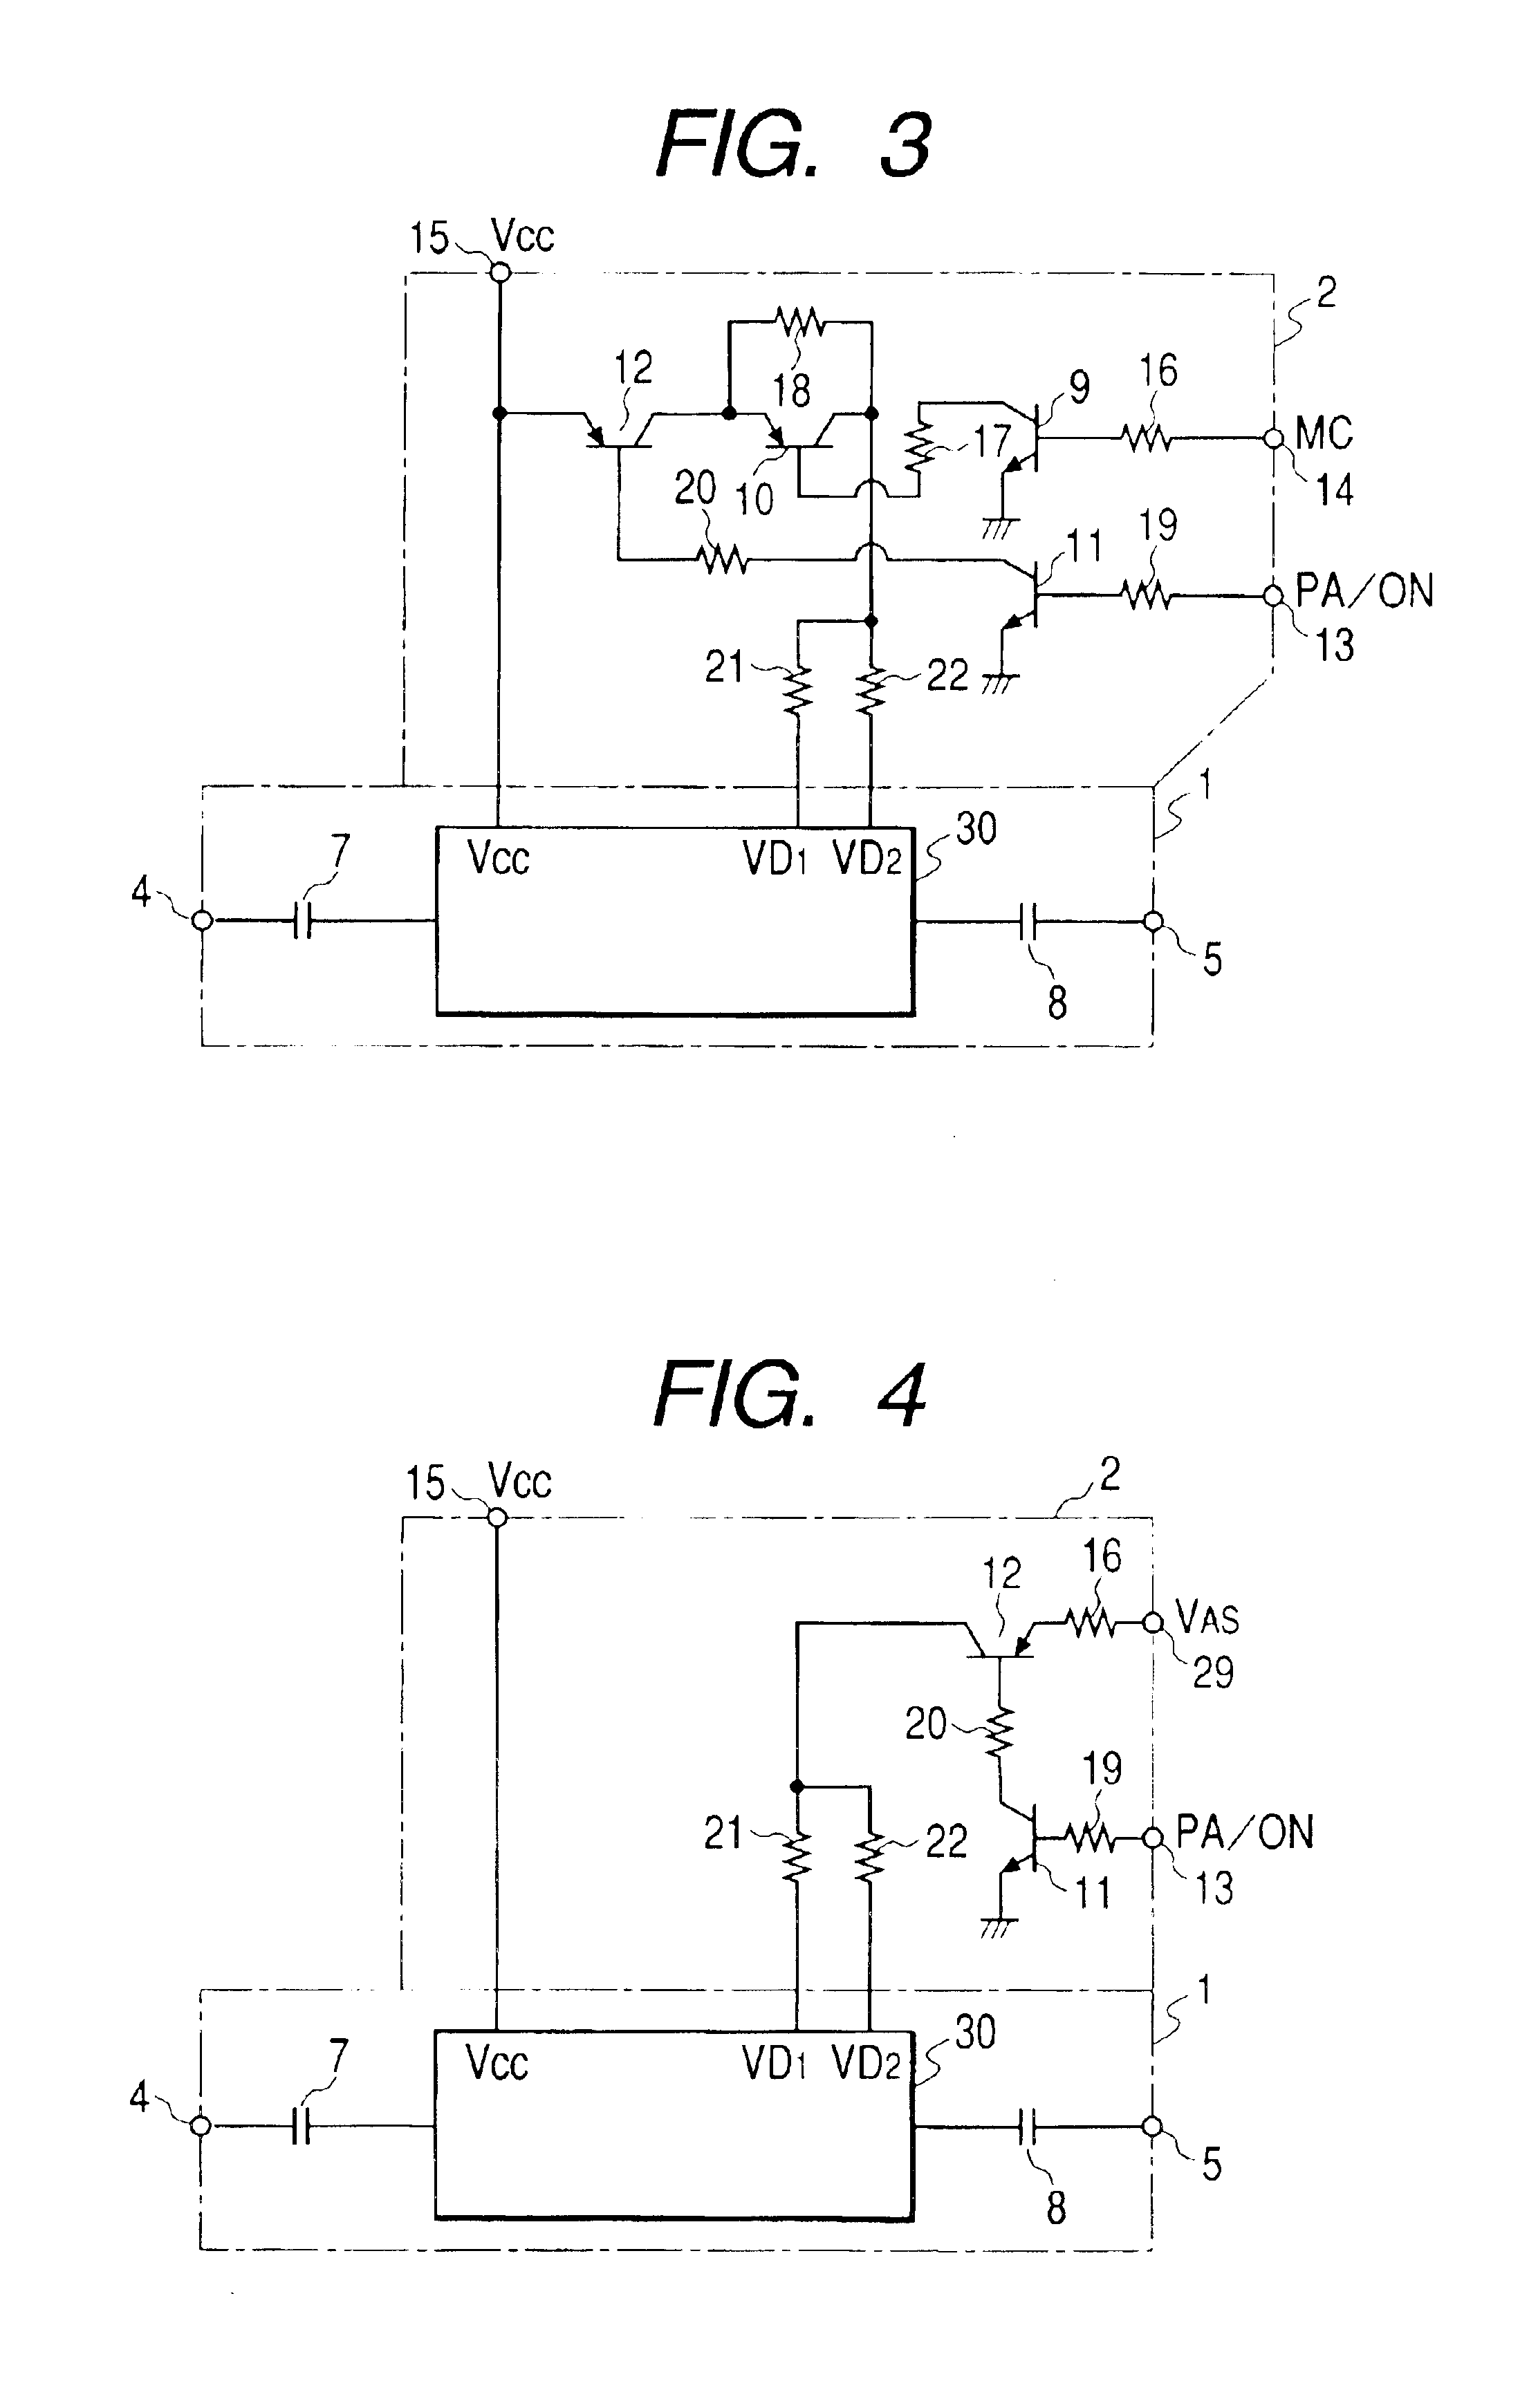 Power amplifier capable of adjusting operating point